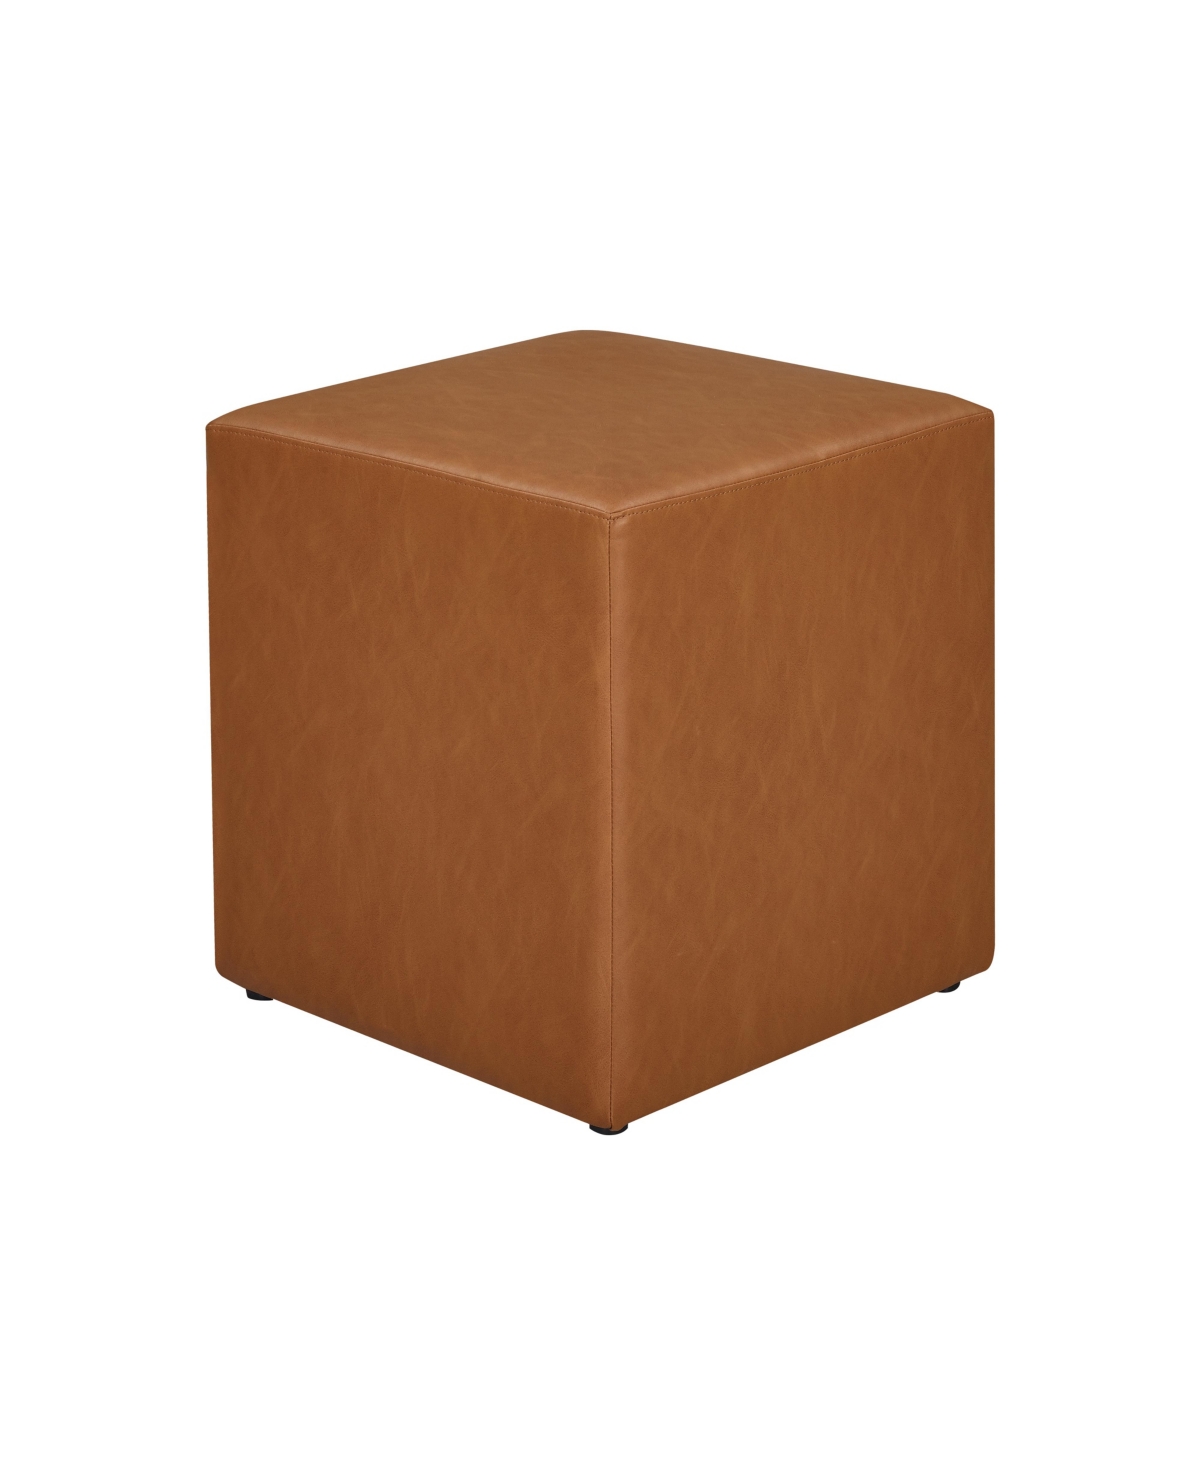 Lifestyle Solutions Studio Living 29.5" Newcastle Faux Leather Ottoman In Camel